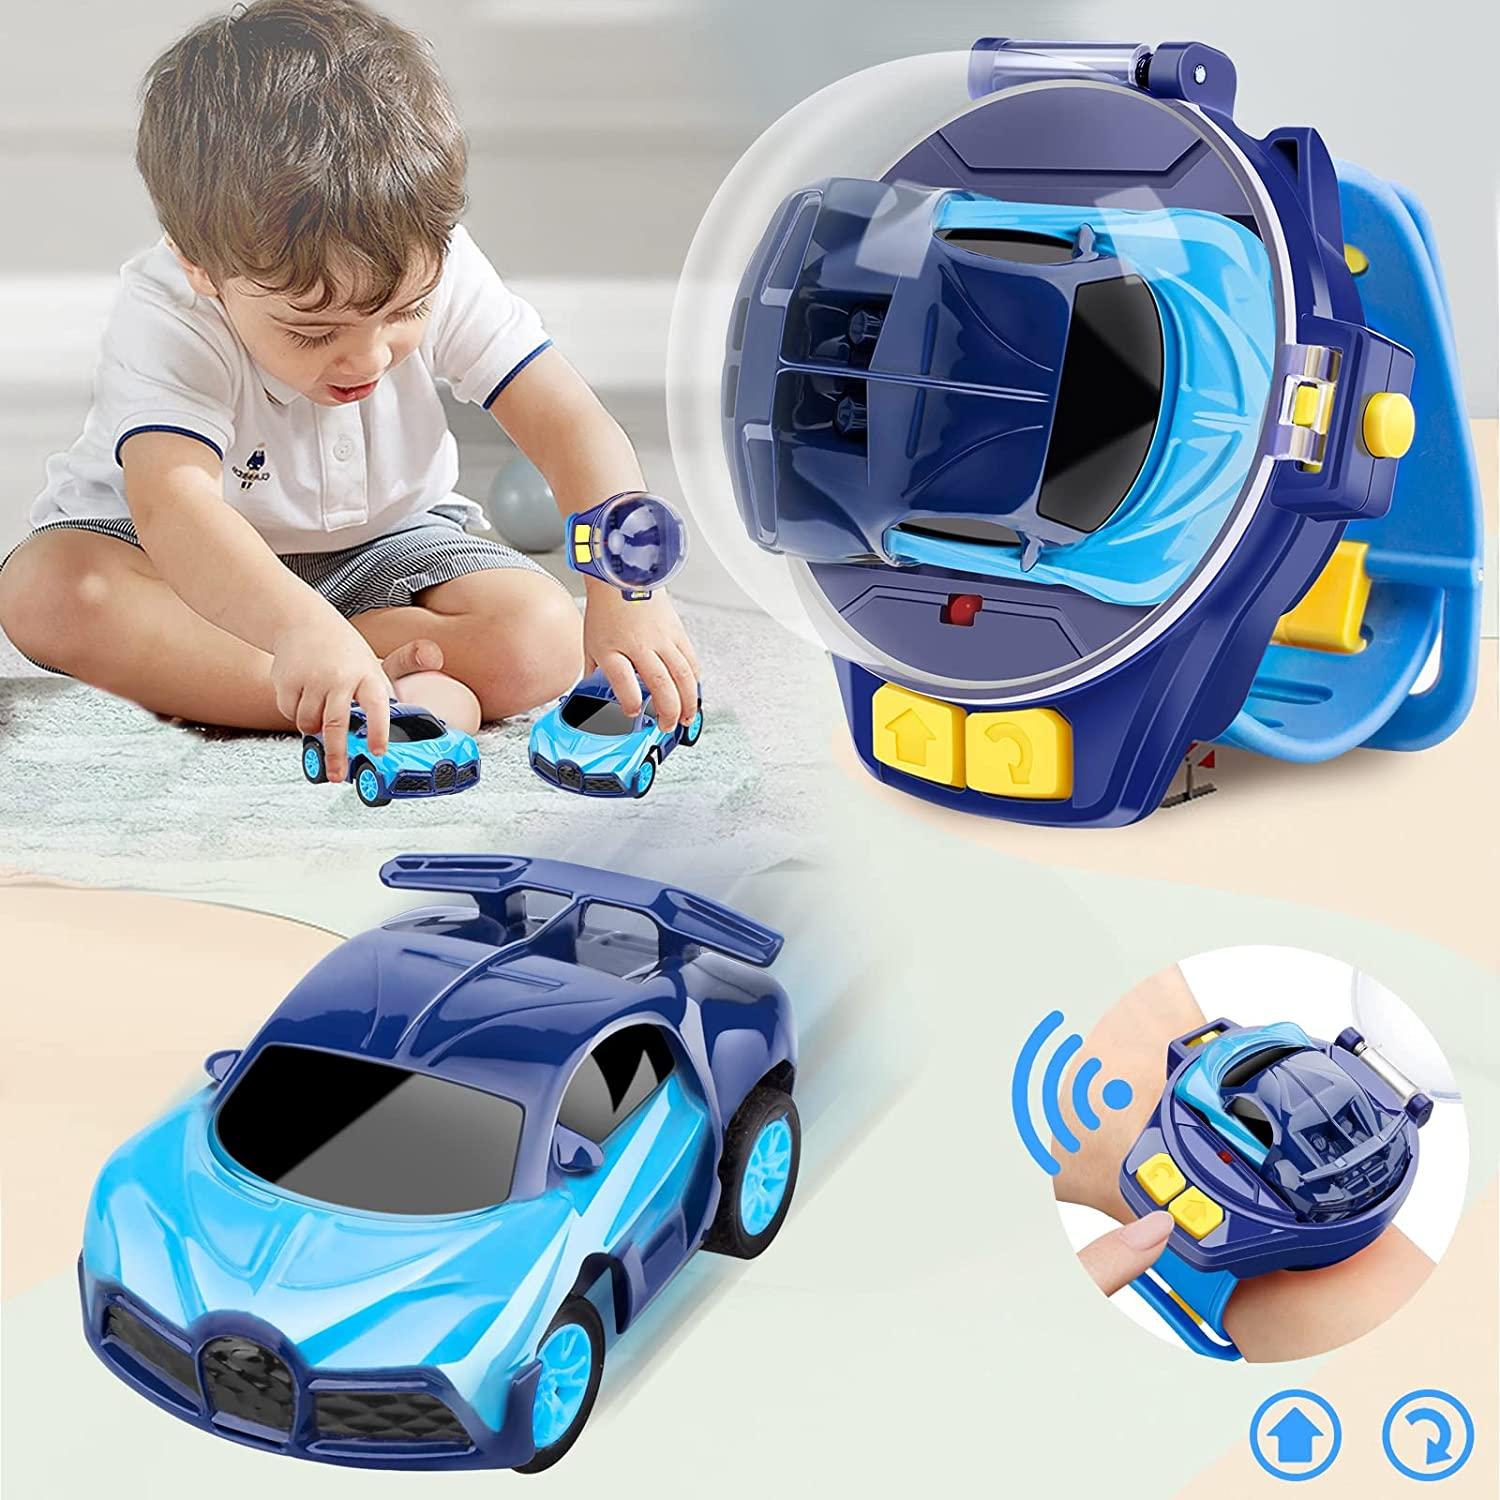 Watch Remote Control Car: Using a watch remote for endless car control.